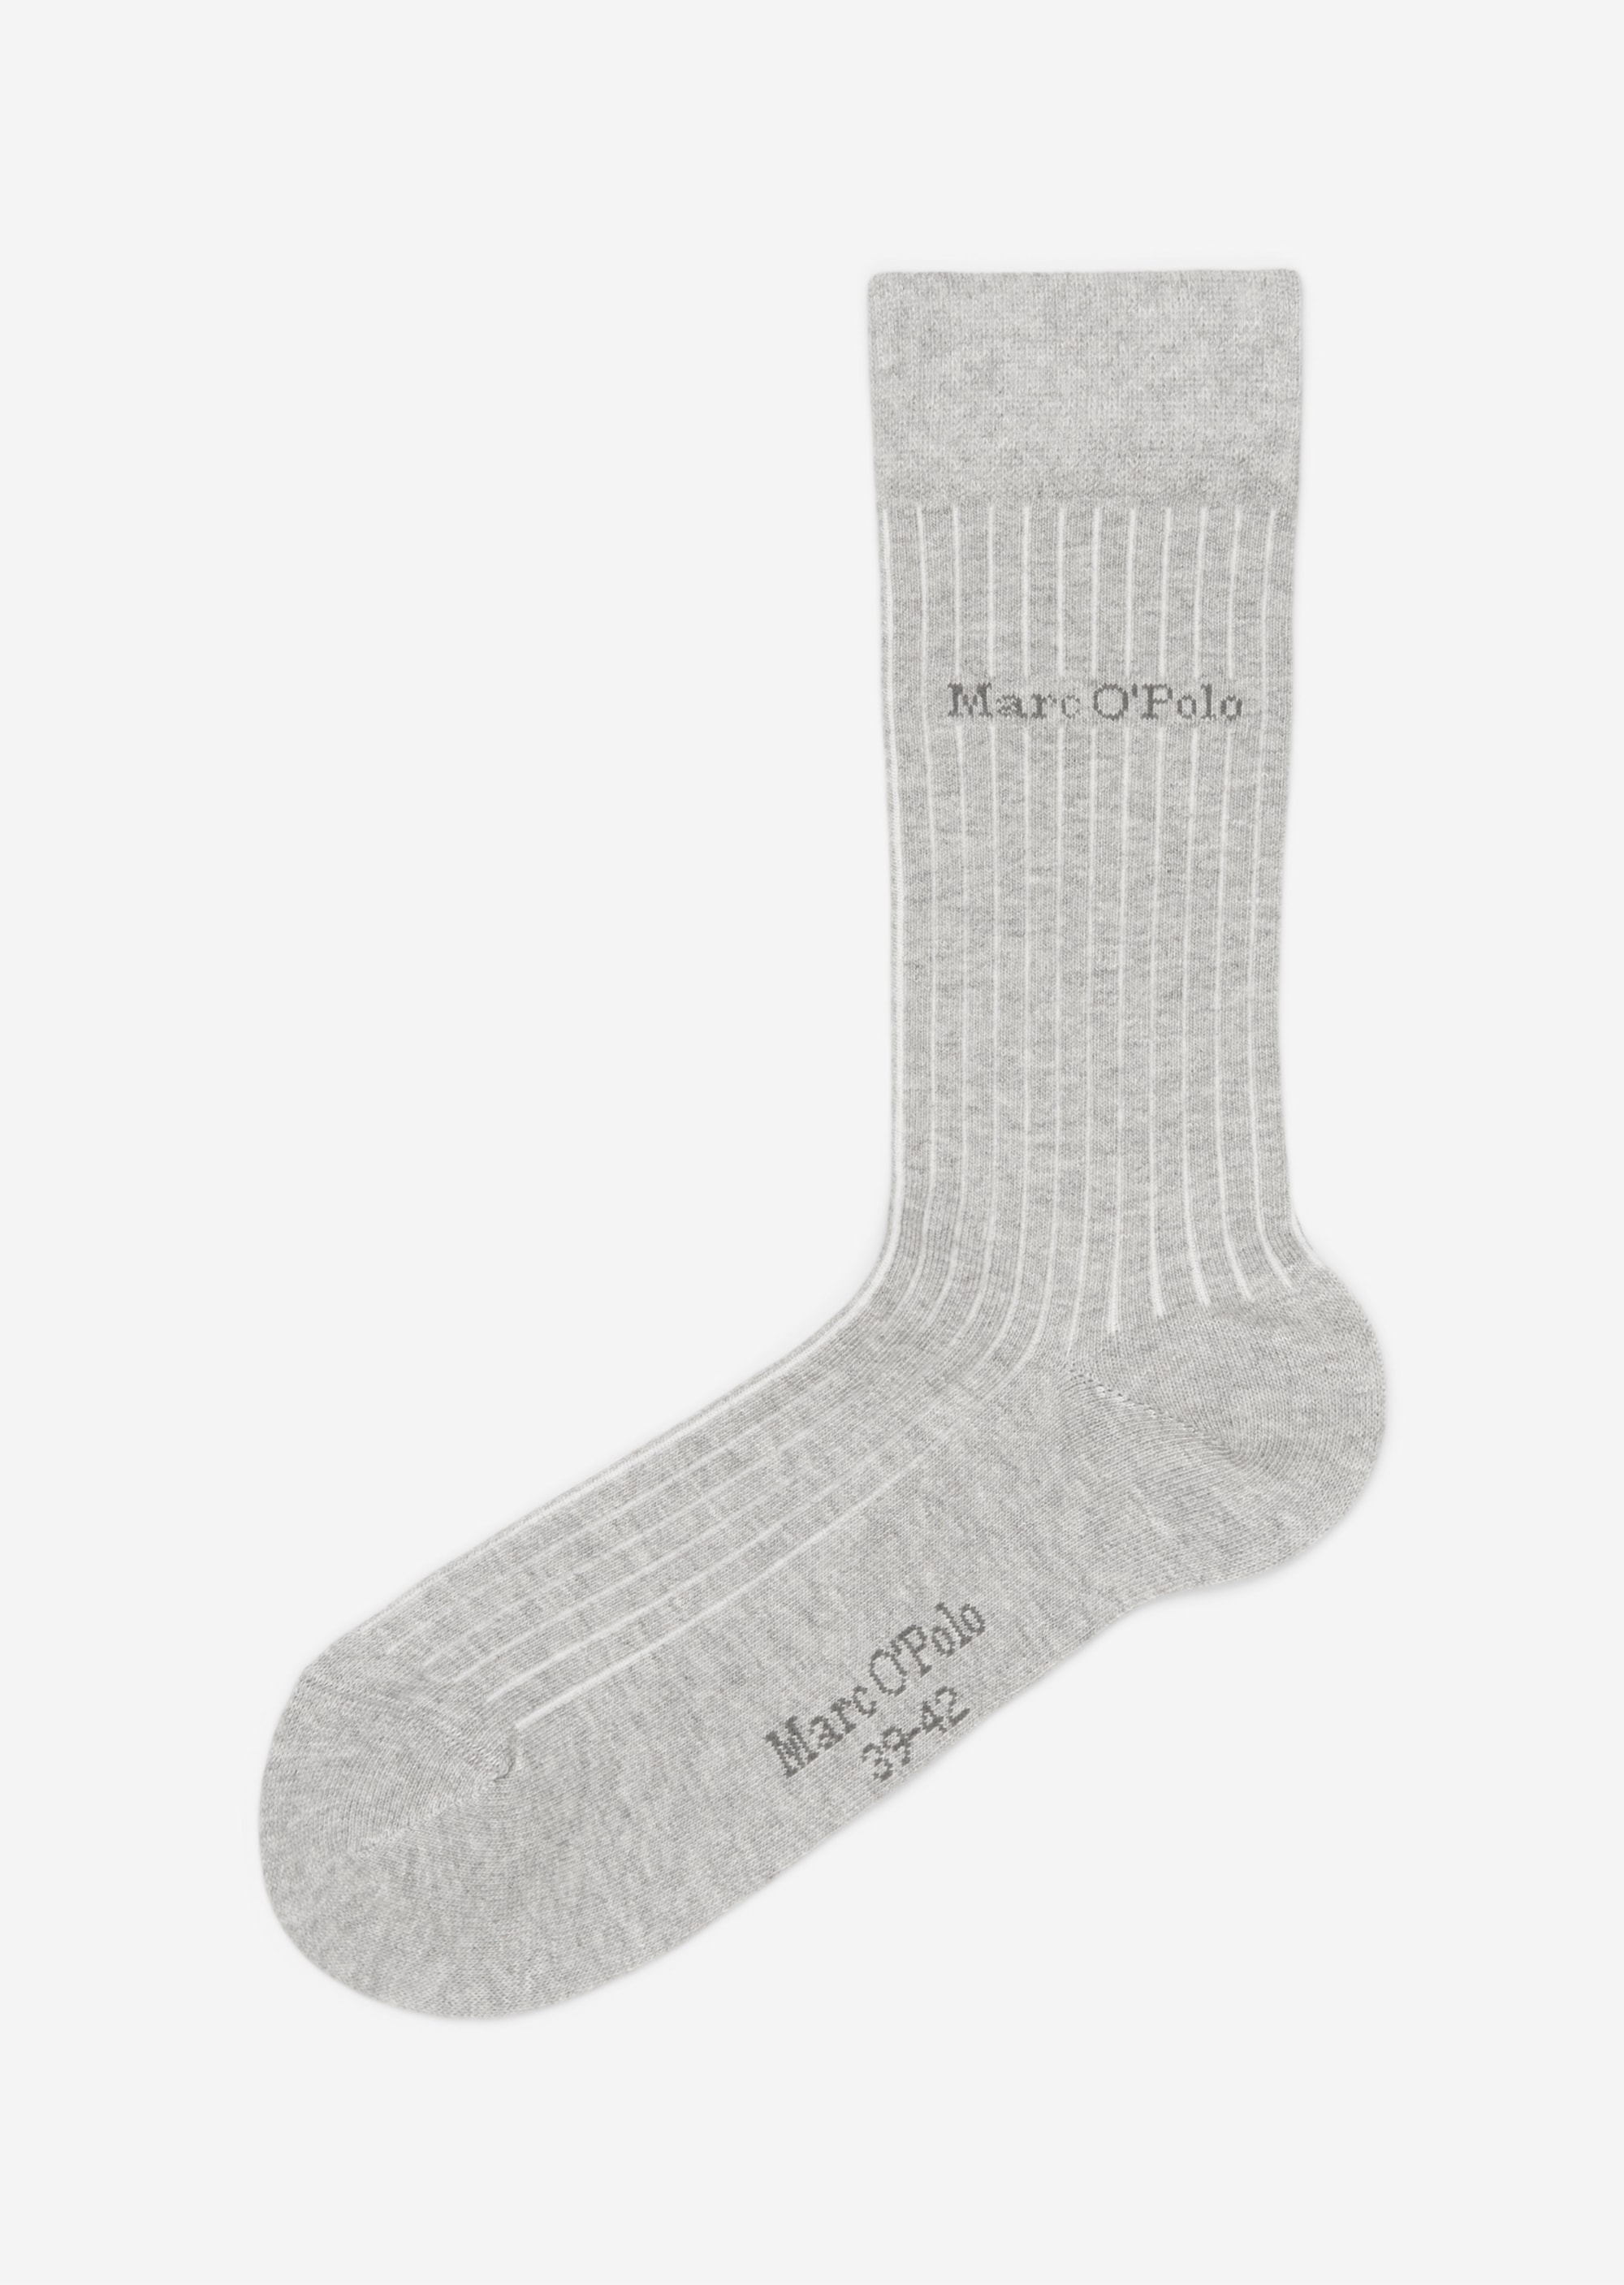 Ribbed socks Pack of two - gray | Underwear | MARC O'POLO